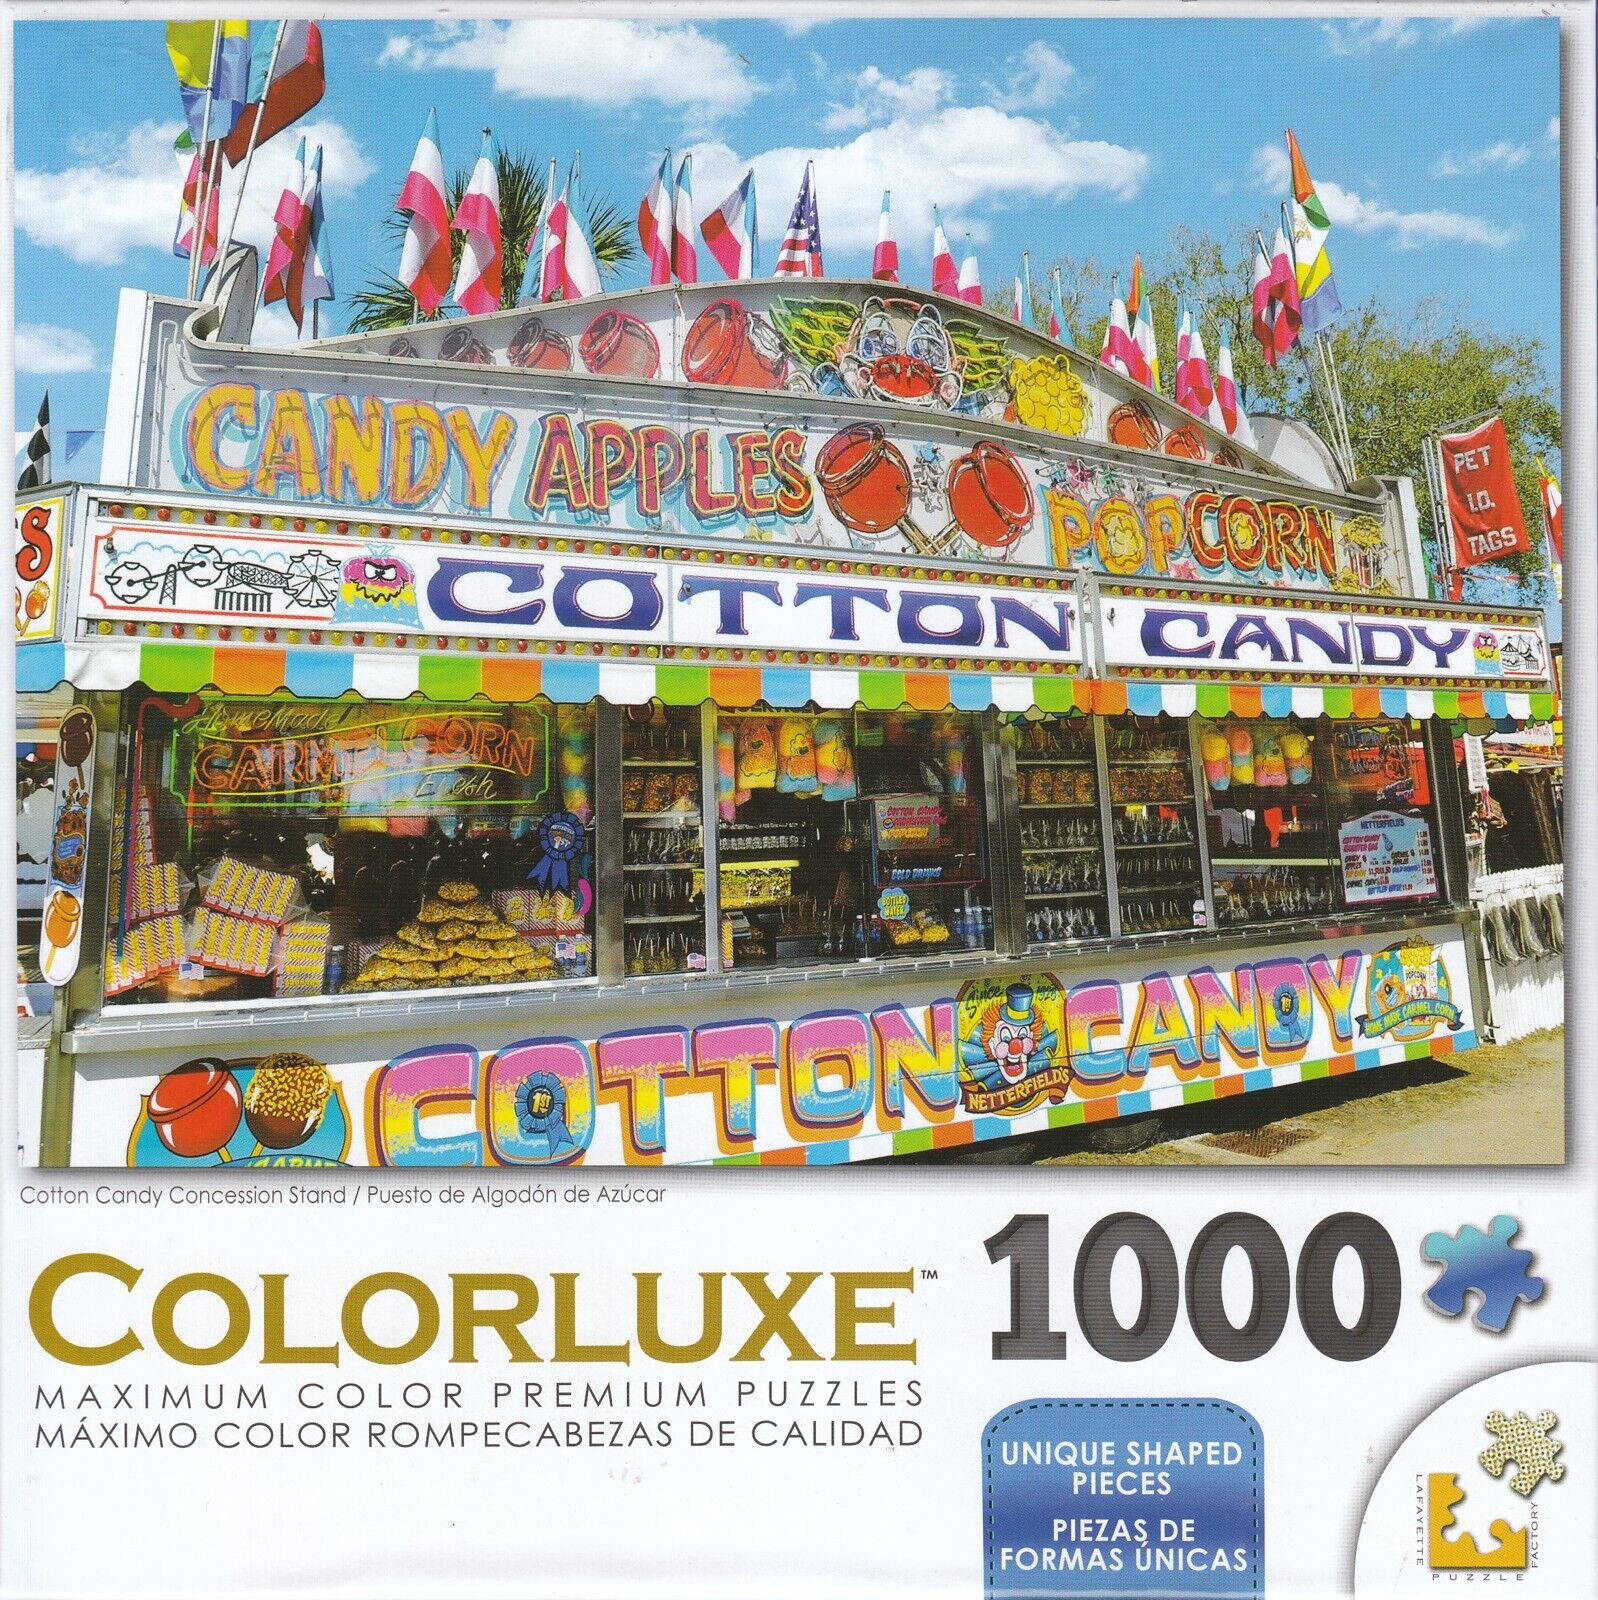 Colorluxe 1000 Piece Puzzle - Cotton Candy Concession Stand